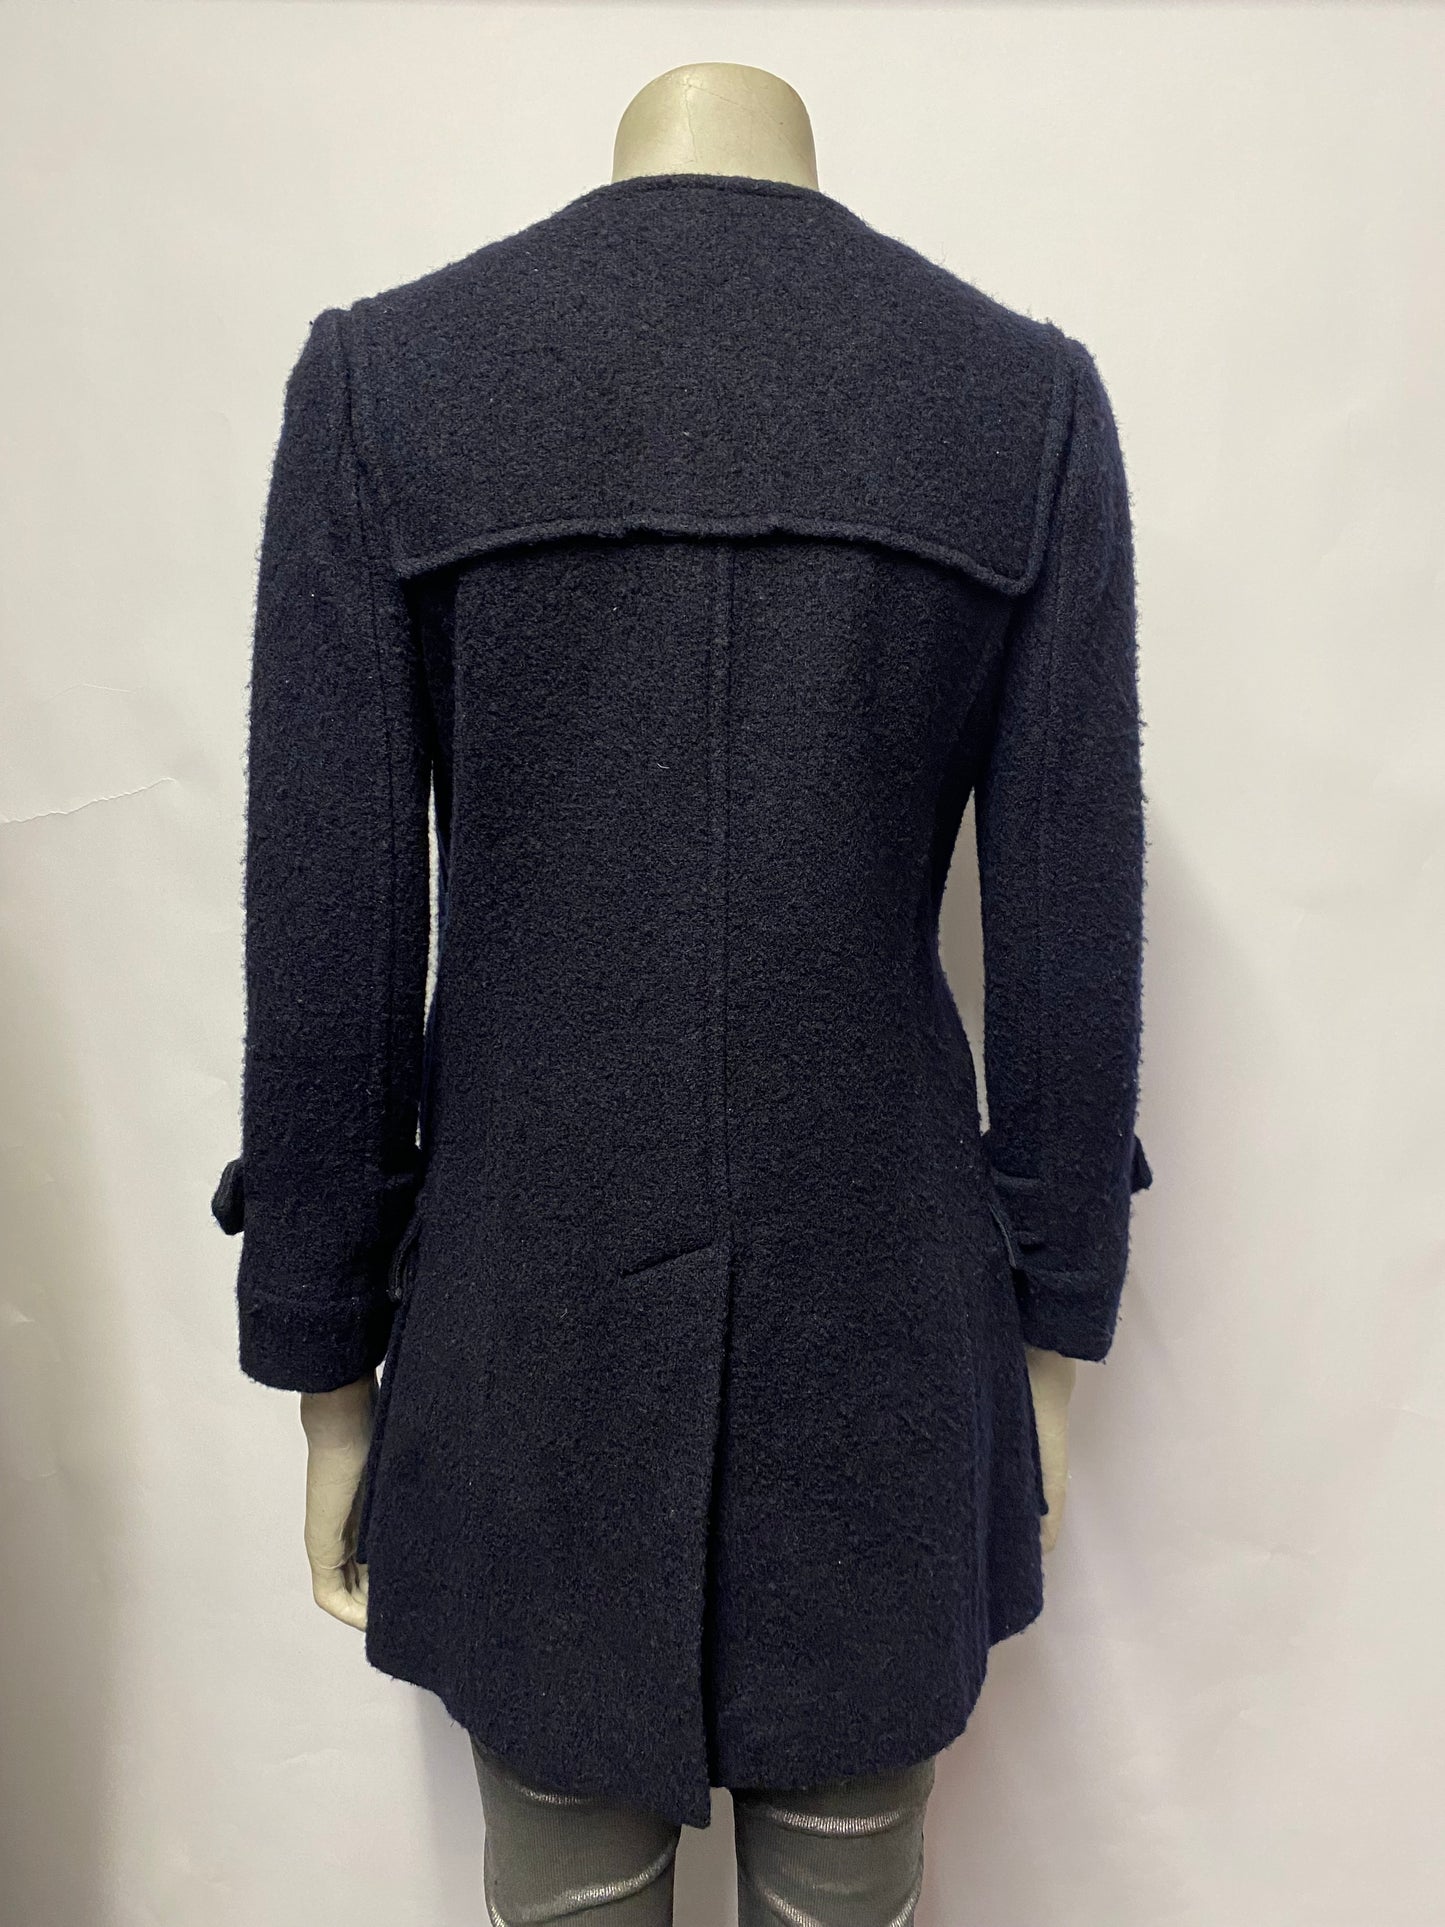 Isabel Marant Etoile Navy Wool Blend Double Breasted Overcoat 8